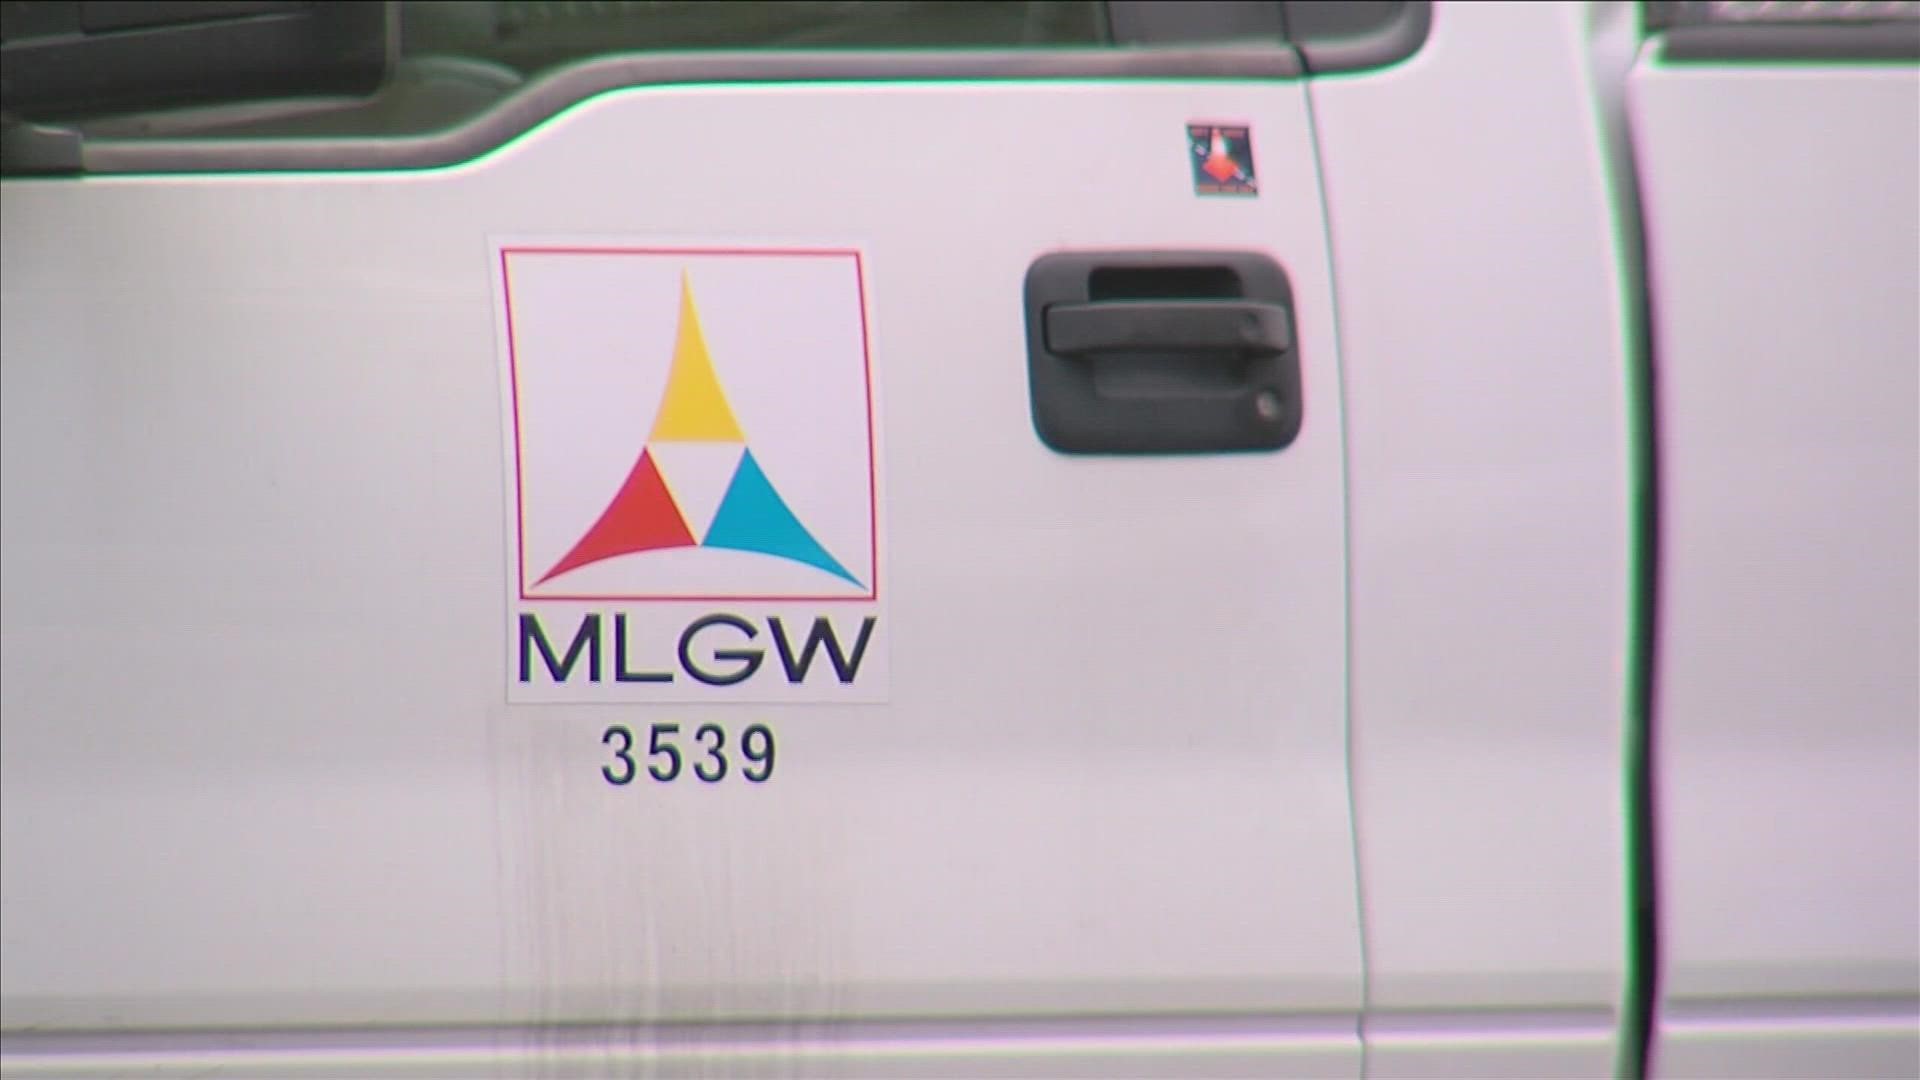 MLGW said Tuesday the reason why people are getting false alerts is because they can't pinpoint power in a single household, only a general area.